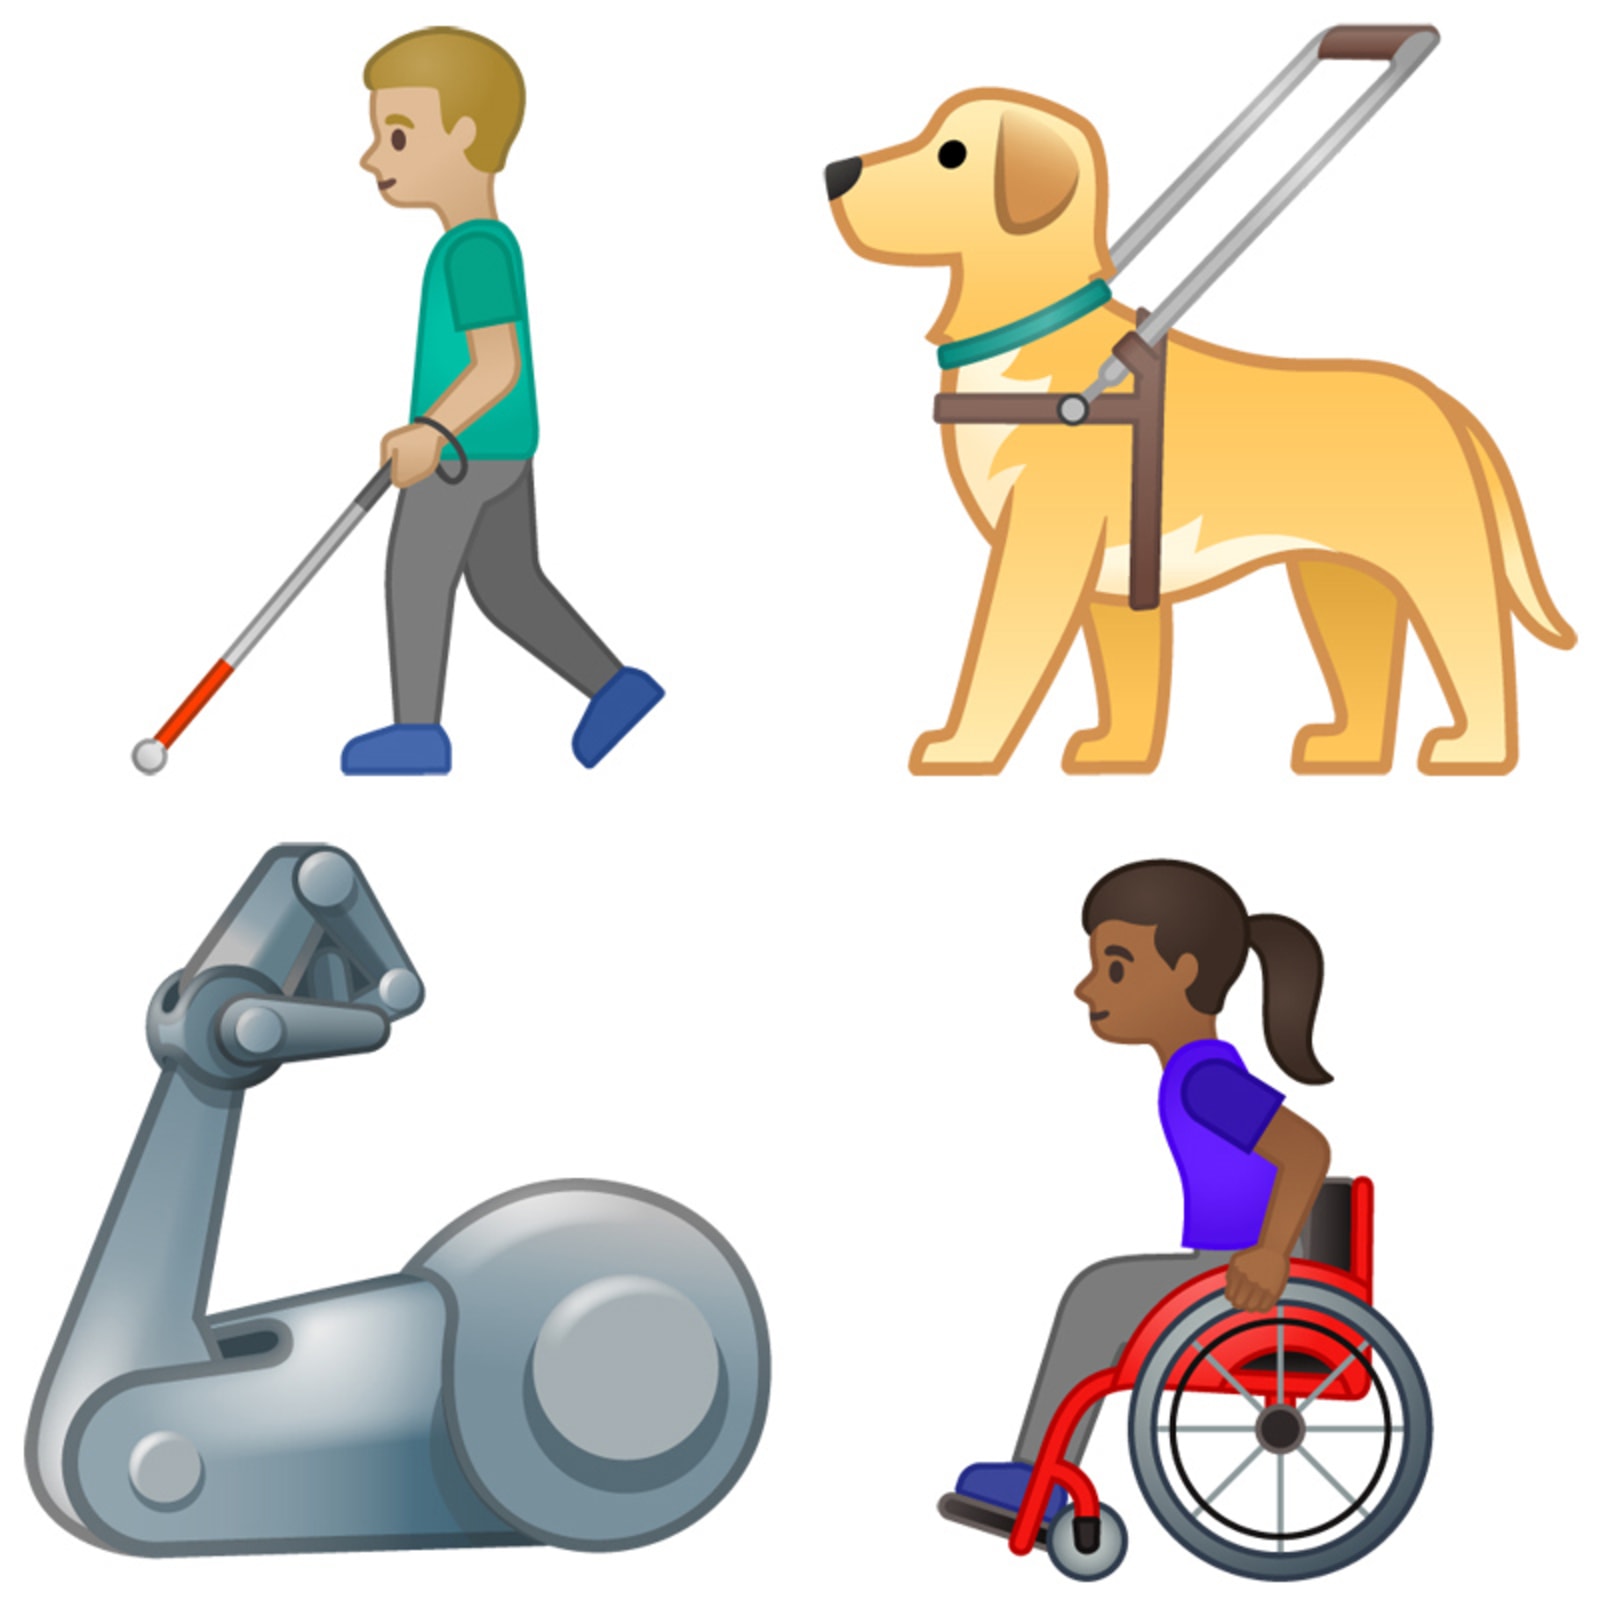 Android Q emoji for accessibility